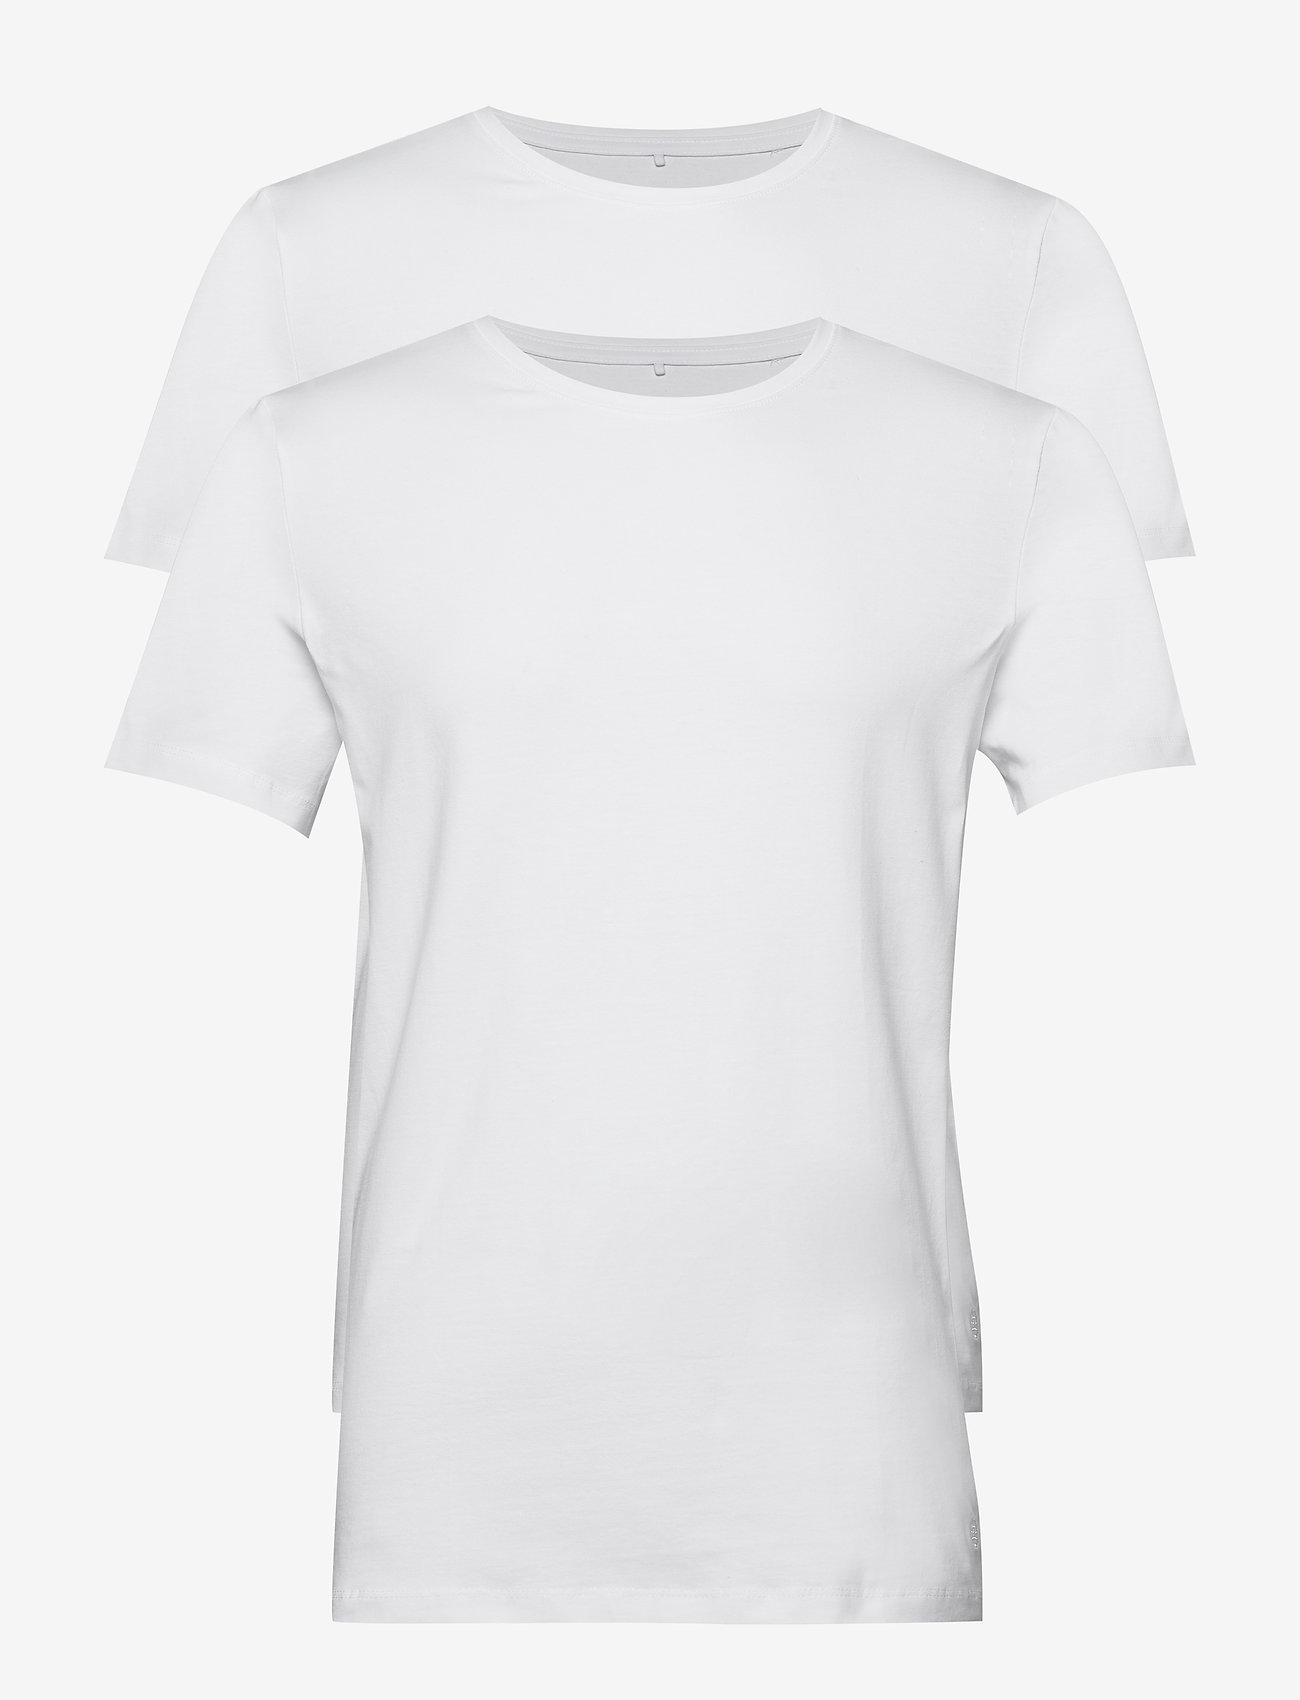 Blend - BHDinton Crew neck tee 2-pack NOOS - multipack t-shirts - white - 0